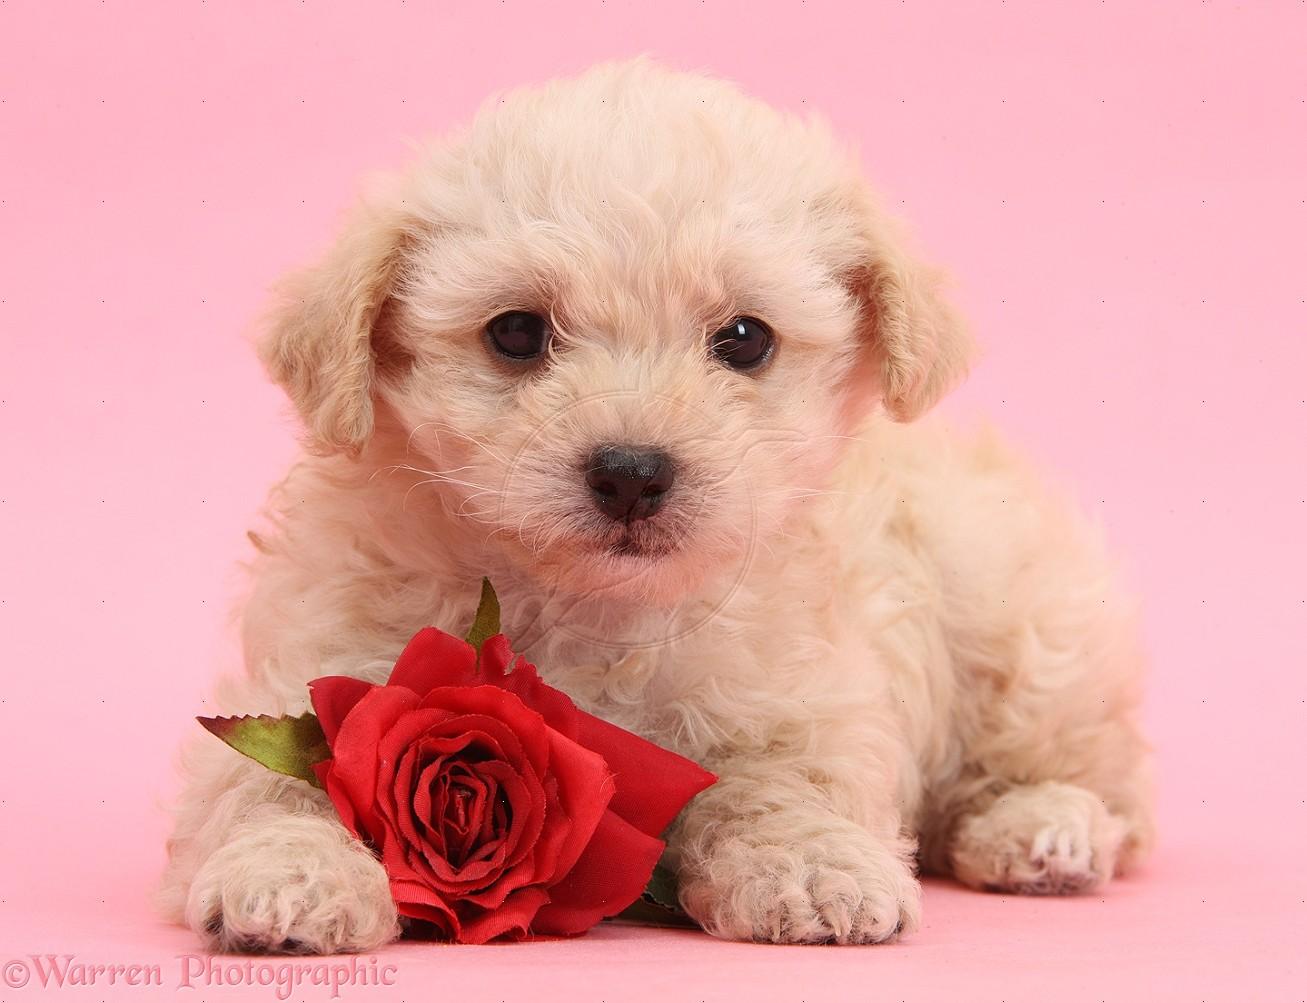 Free download Cute Valentine Puppy With Rose On Pink Background 1307x1003 iWallHD [1307x1003] for your Desktop, Mobile & Tablet. Explore Valentine's Day Puppies Free Wallpaper. Happy Valentines Day Wallpaper